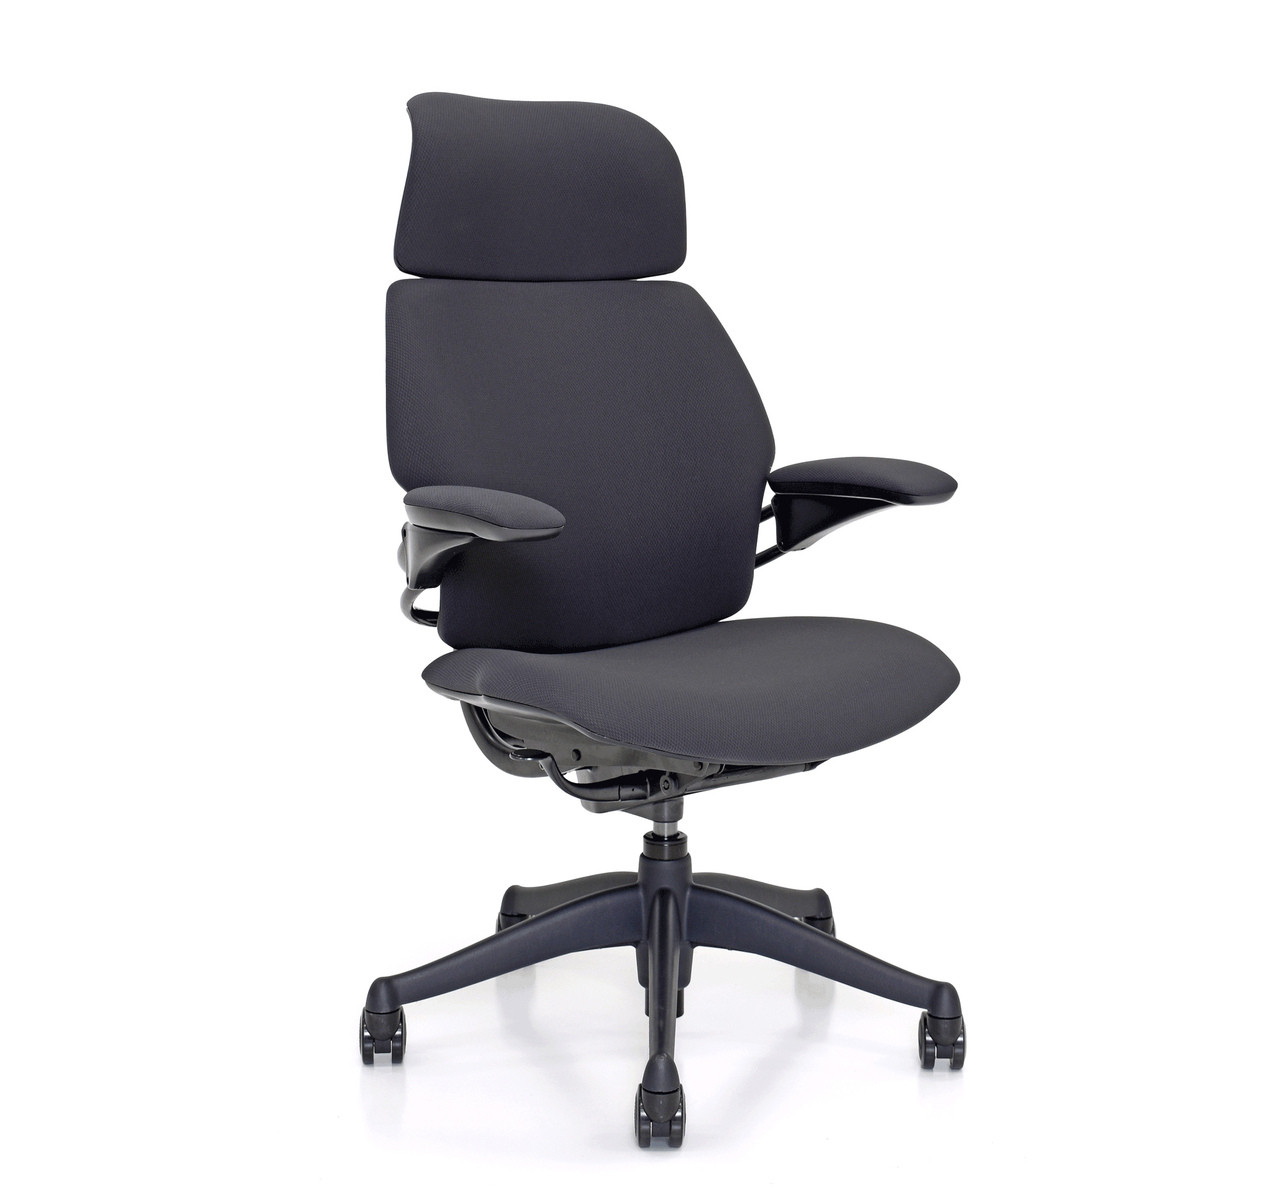 Can I get some feedback on seat comfort for the Humanscale Freedom